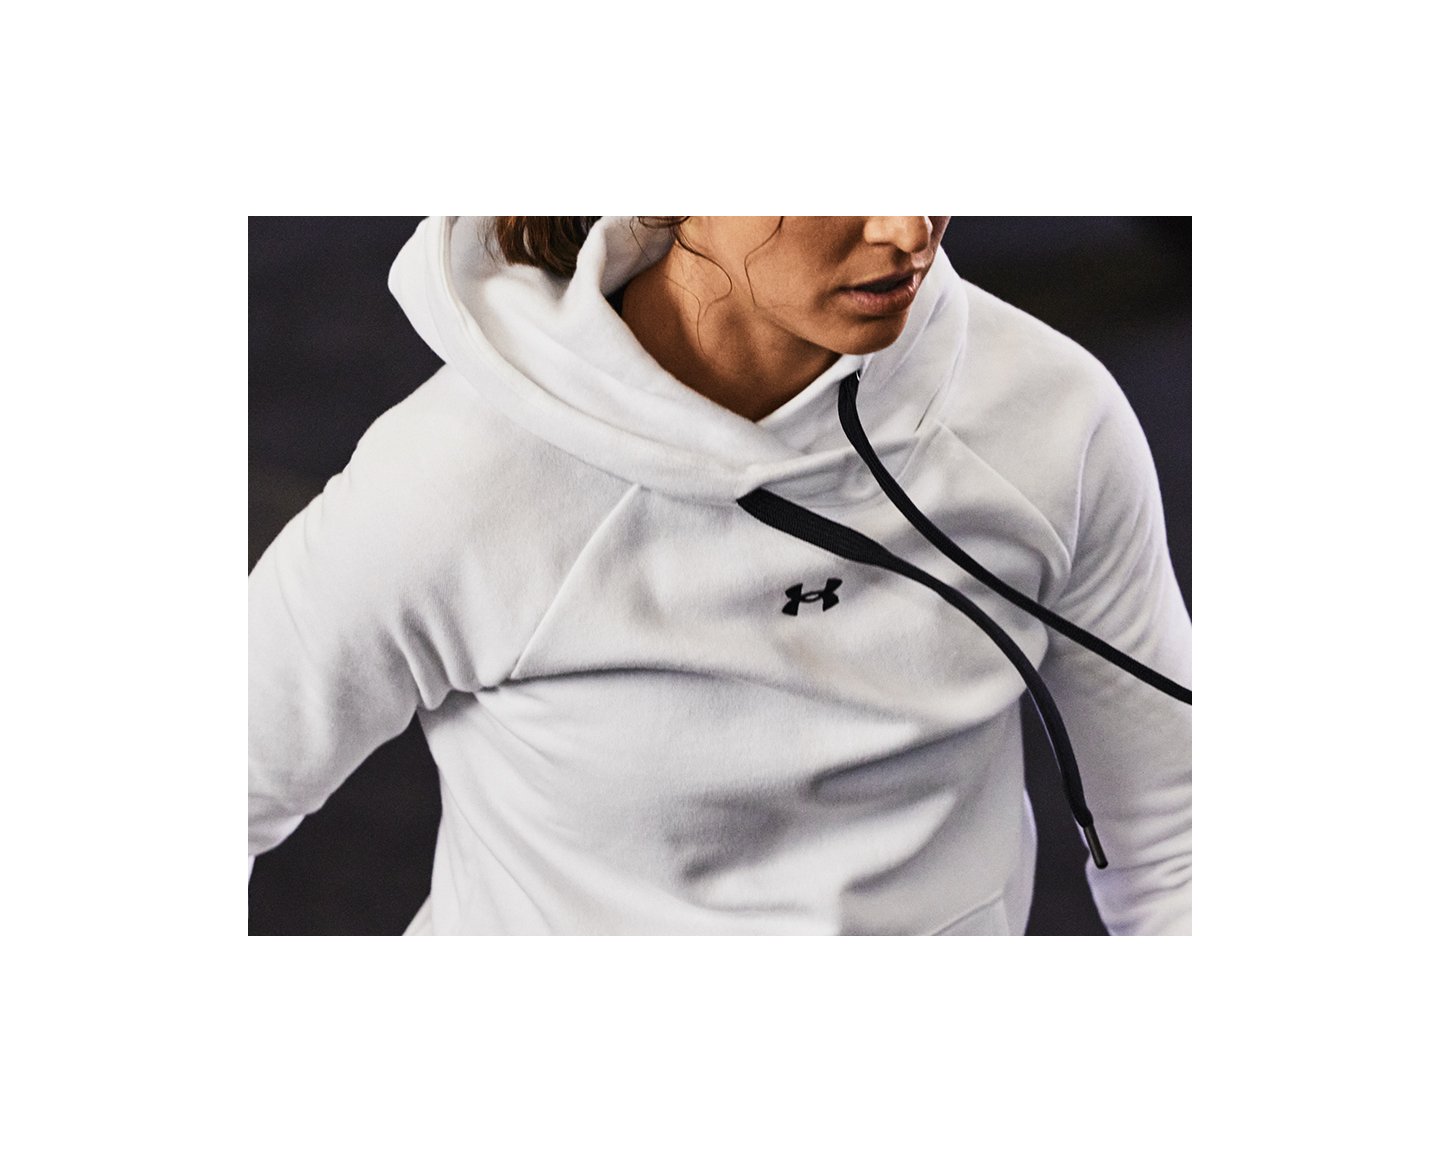 Women's Under Armour Hoodie – King Sports